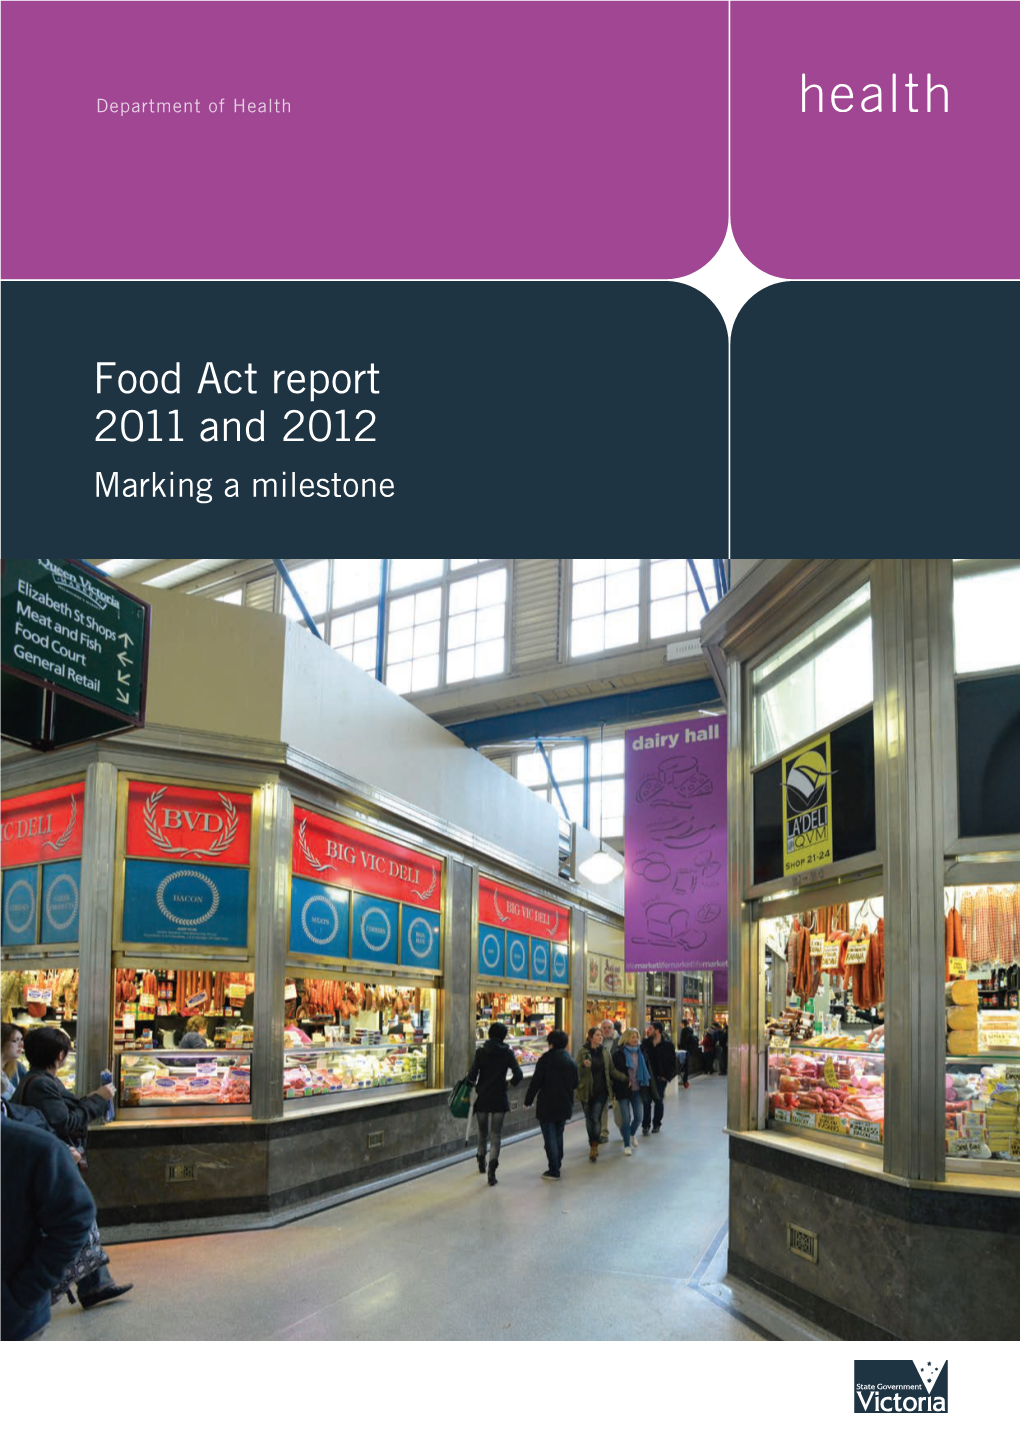 Food Act Report 2011 and 2012